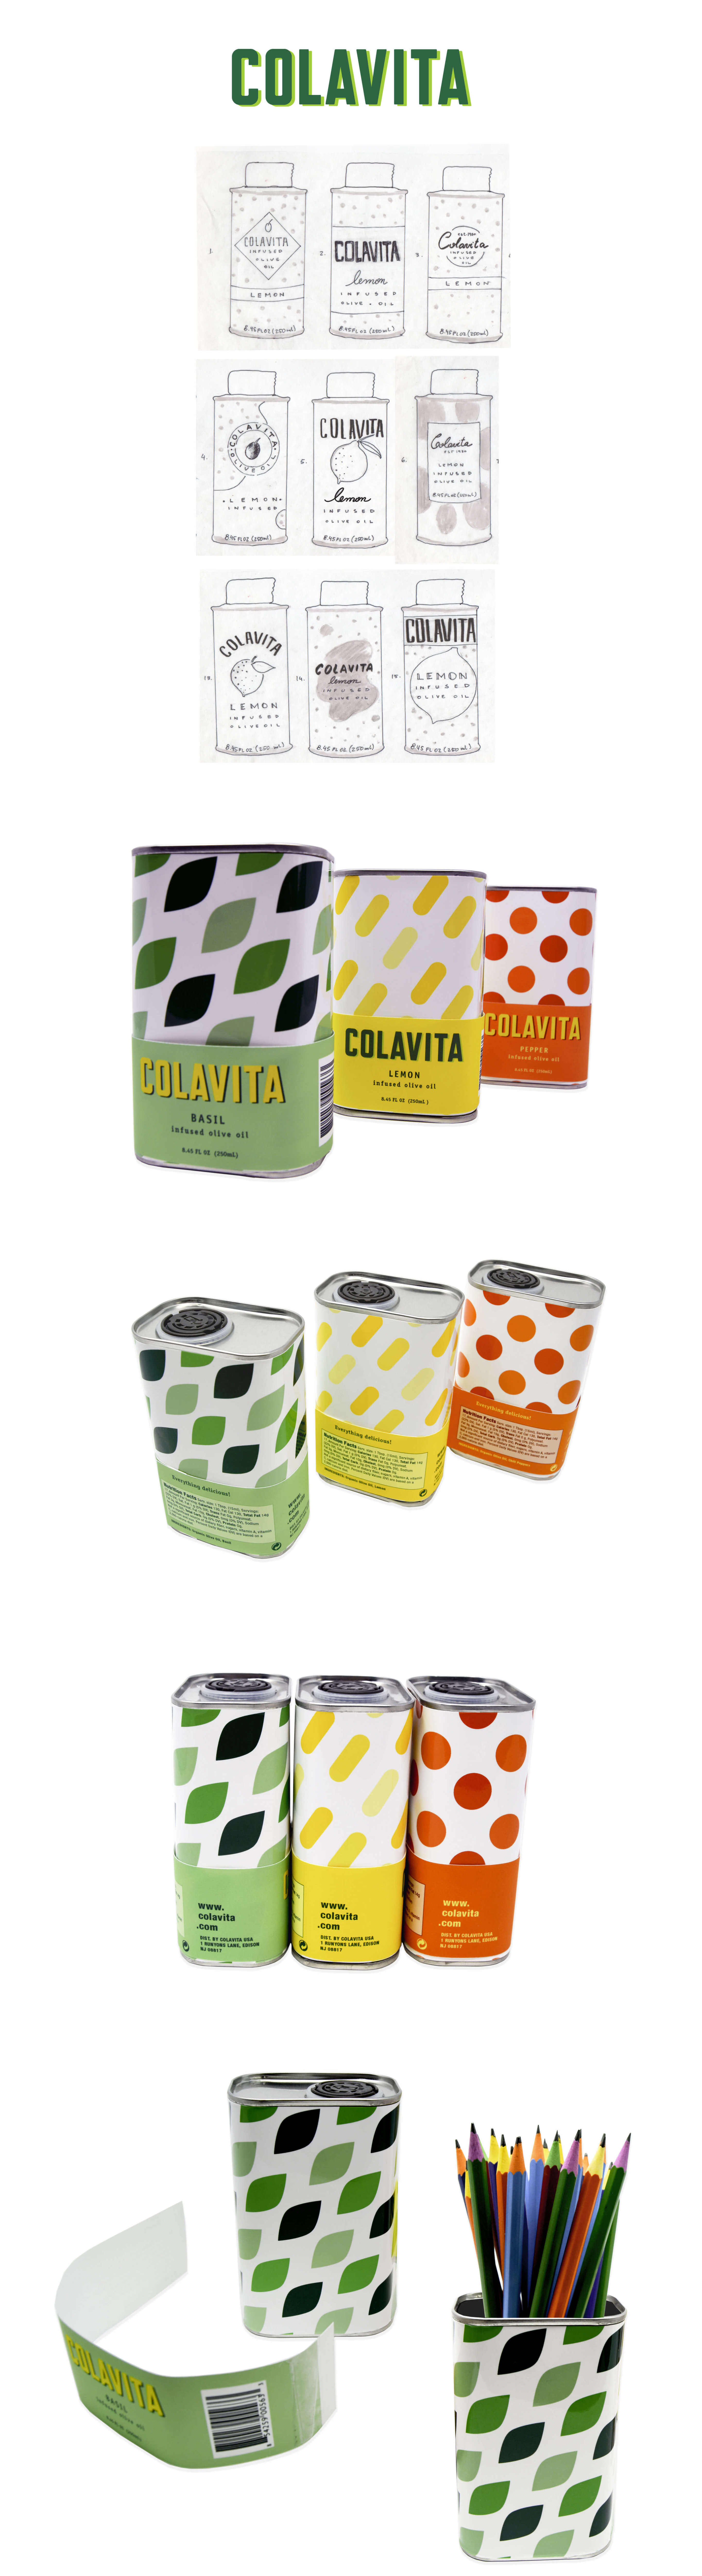 Colavita student package design project